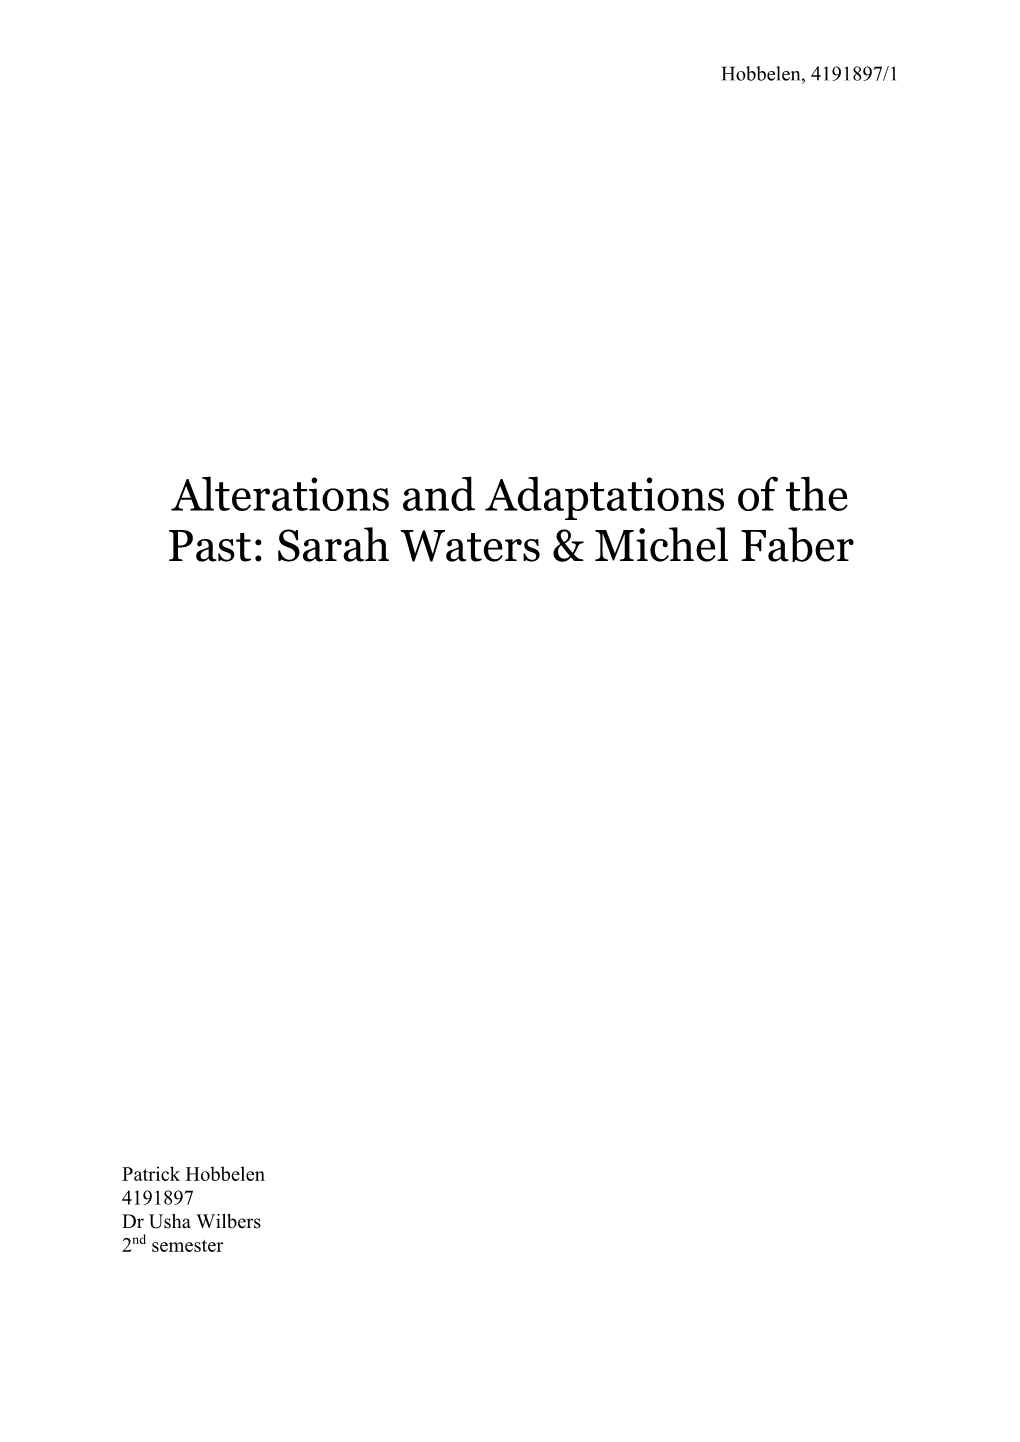 Alterations and Adaptations of the Past: Sarah Waters & Michel Faber